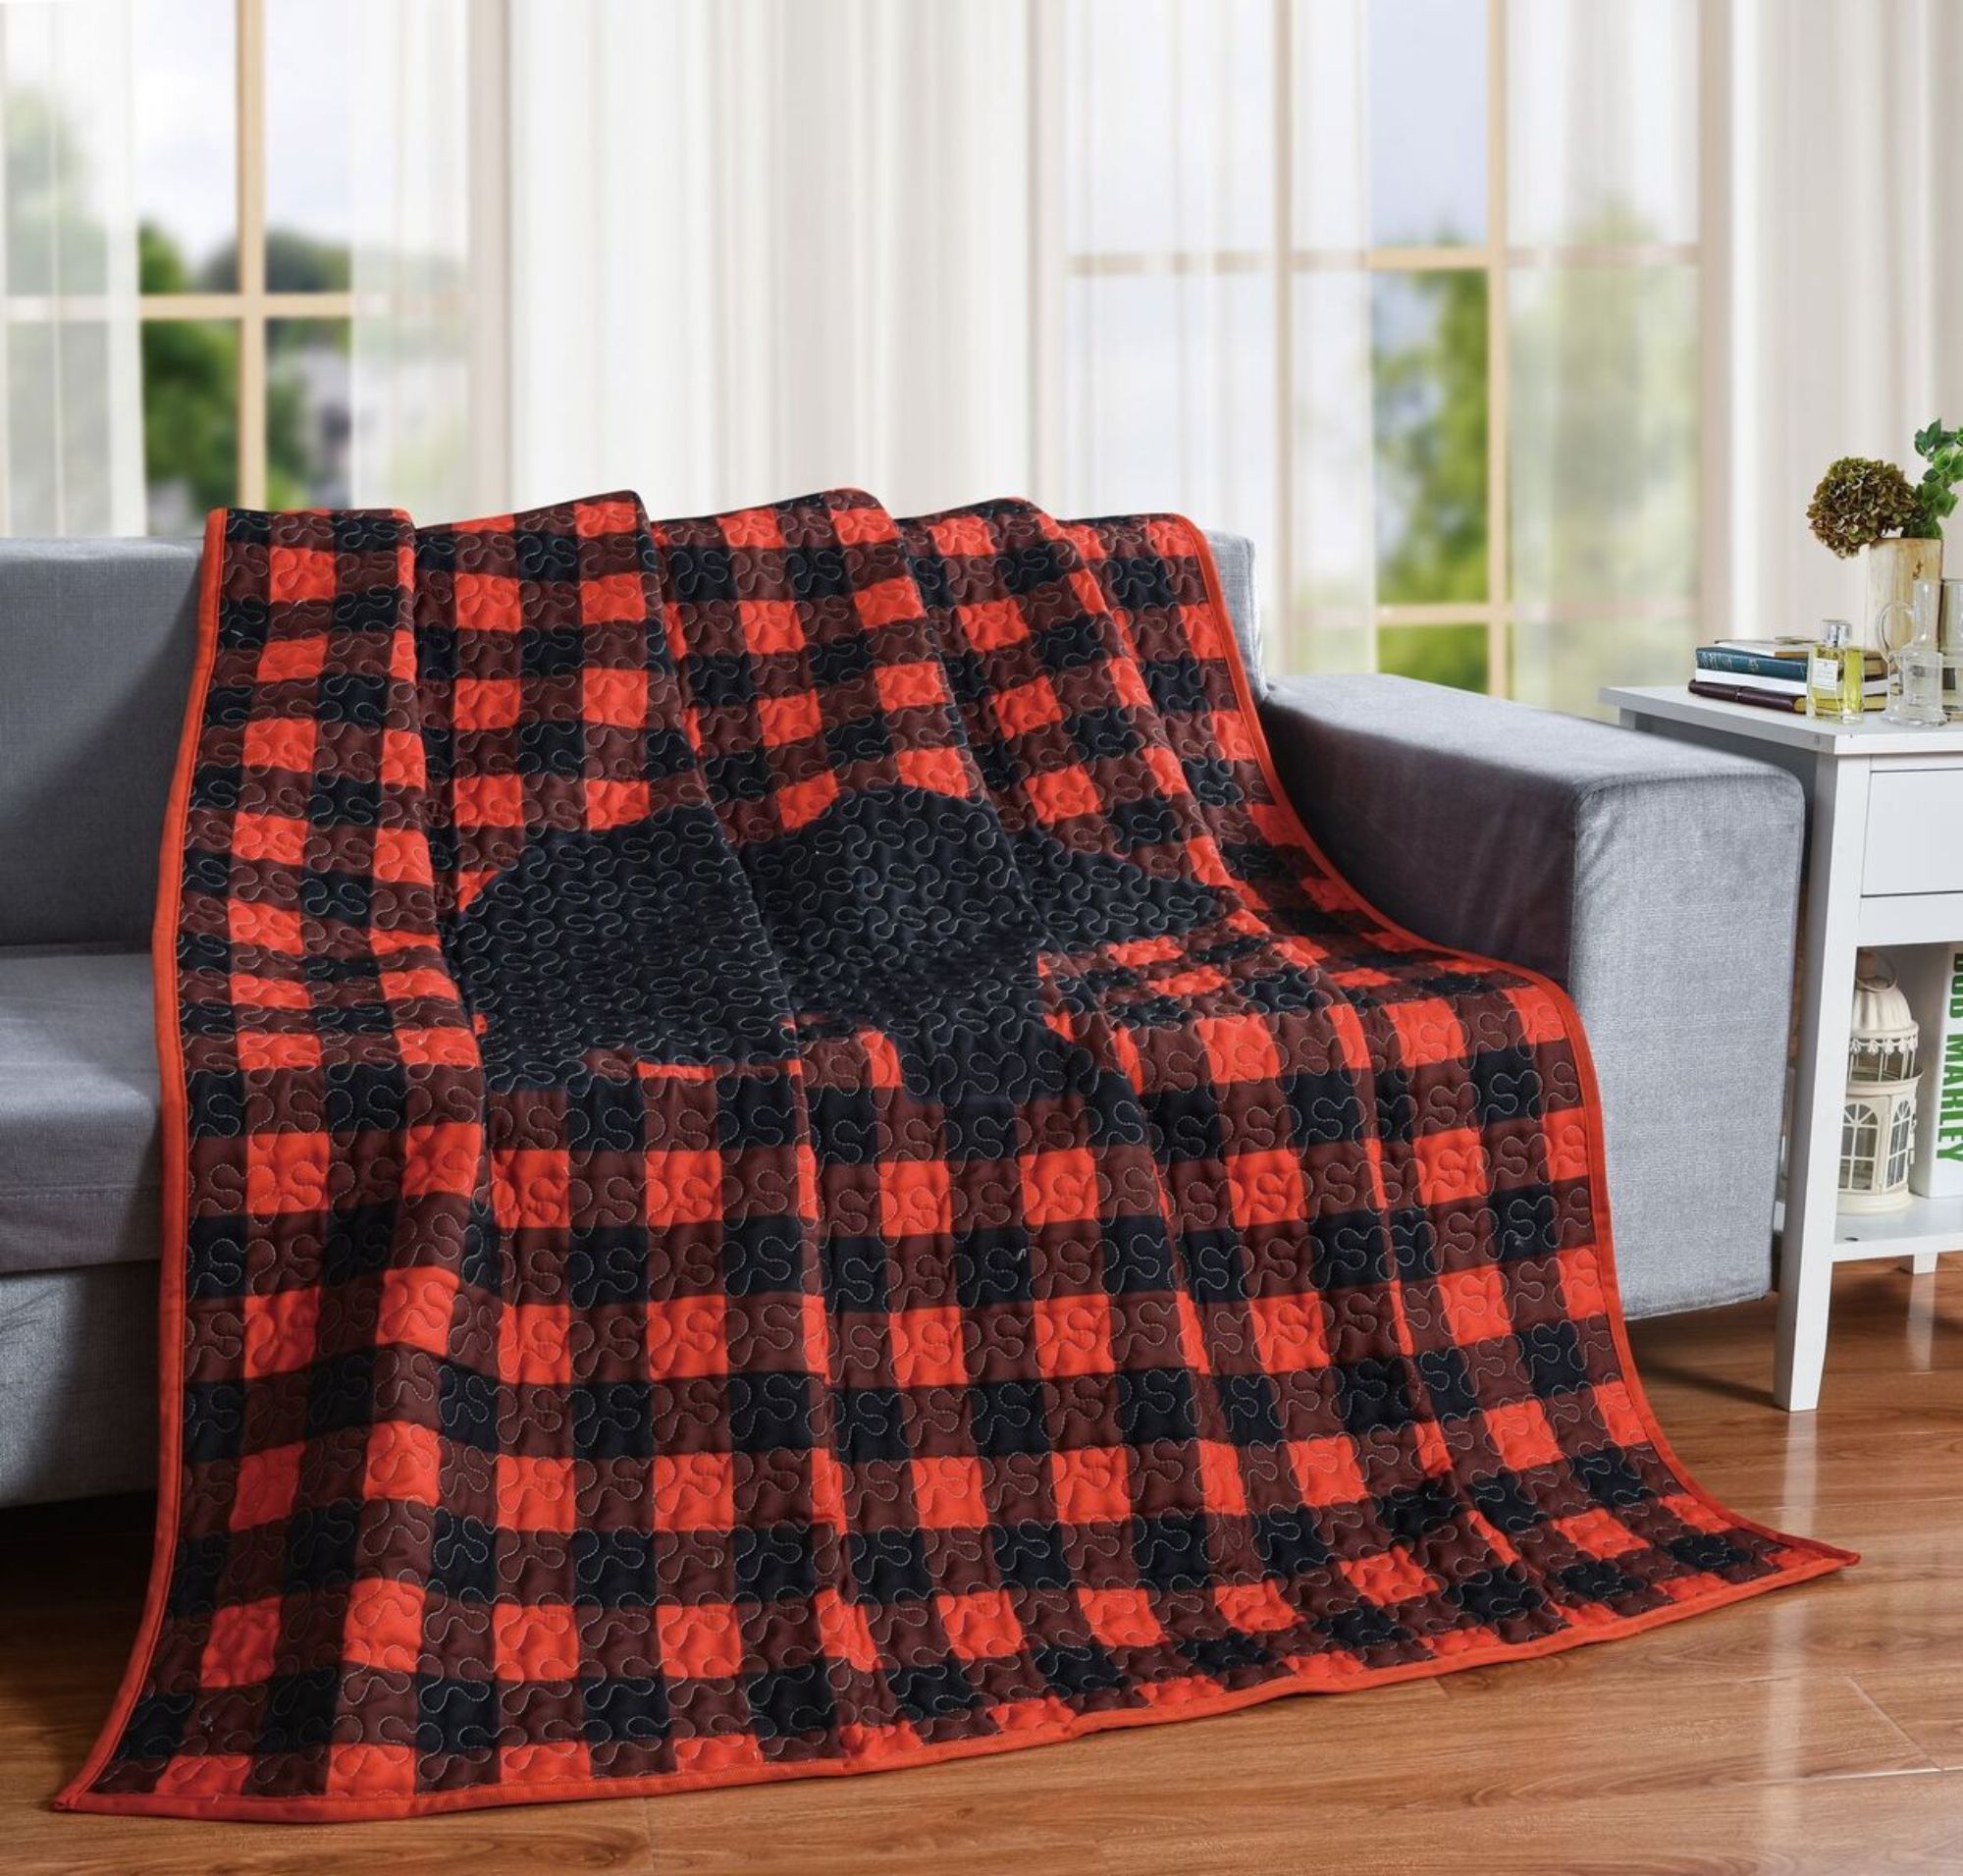 De Leon Collection Red and Black Plaid Bear Quilted Throw Blanket 60" x 50"